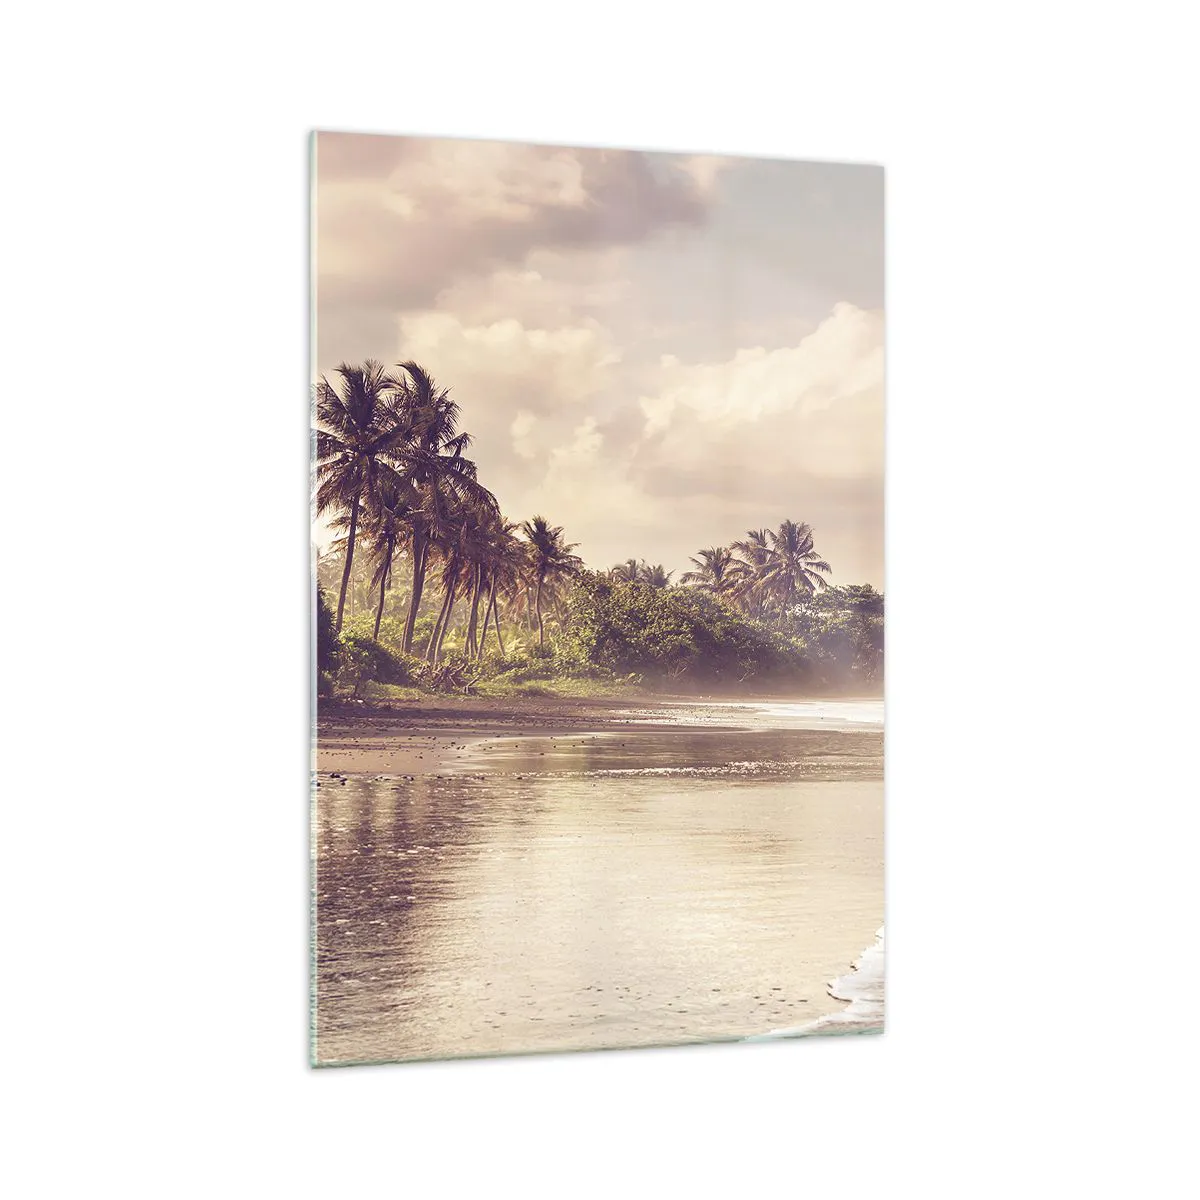 Glass picture  Arttor 70x100 cm - Caress of the Waves - Landscape, Beach, Sea, Ocean, Coconut Palm, For living-room, For bedroom, White, Brown, Vertical, Glass, GPA70x100-4917